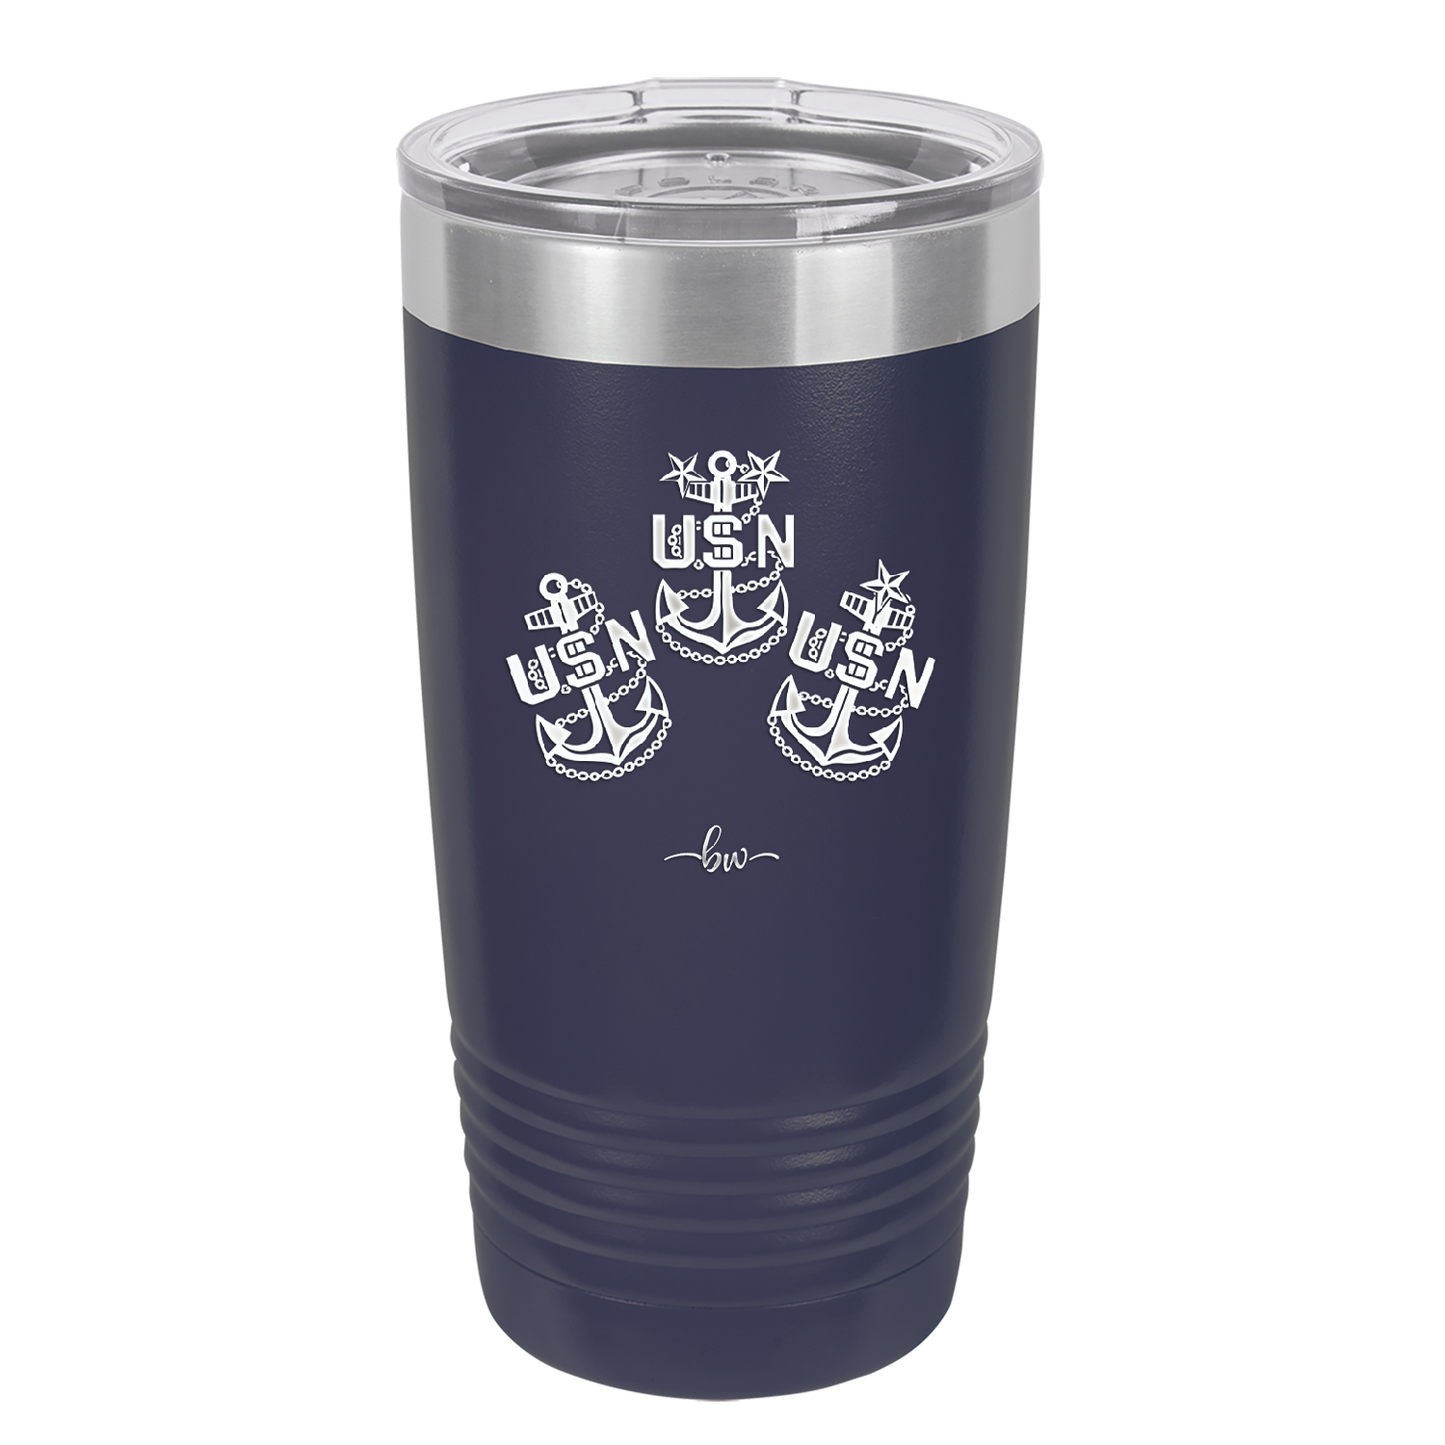 USN Petty Officer Anchor - Laser Engraved Stainless Steel Drinkware - 1609 -